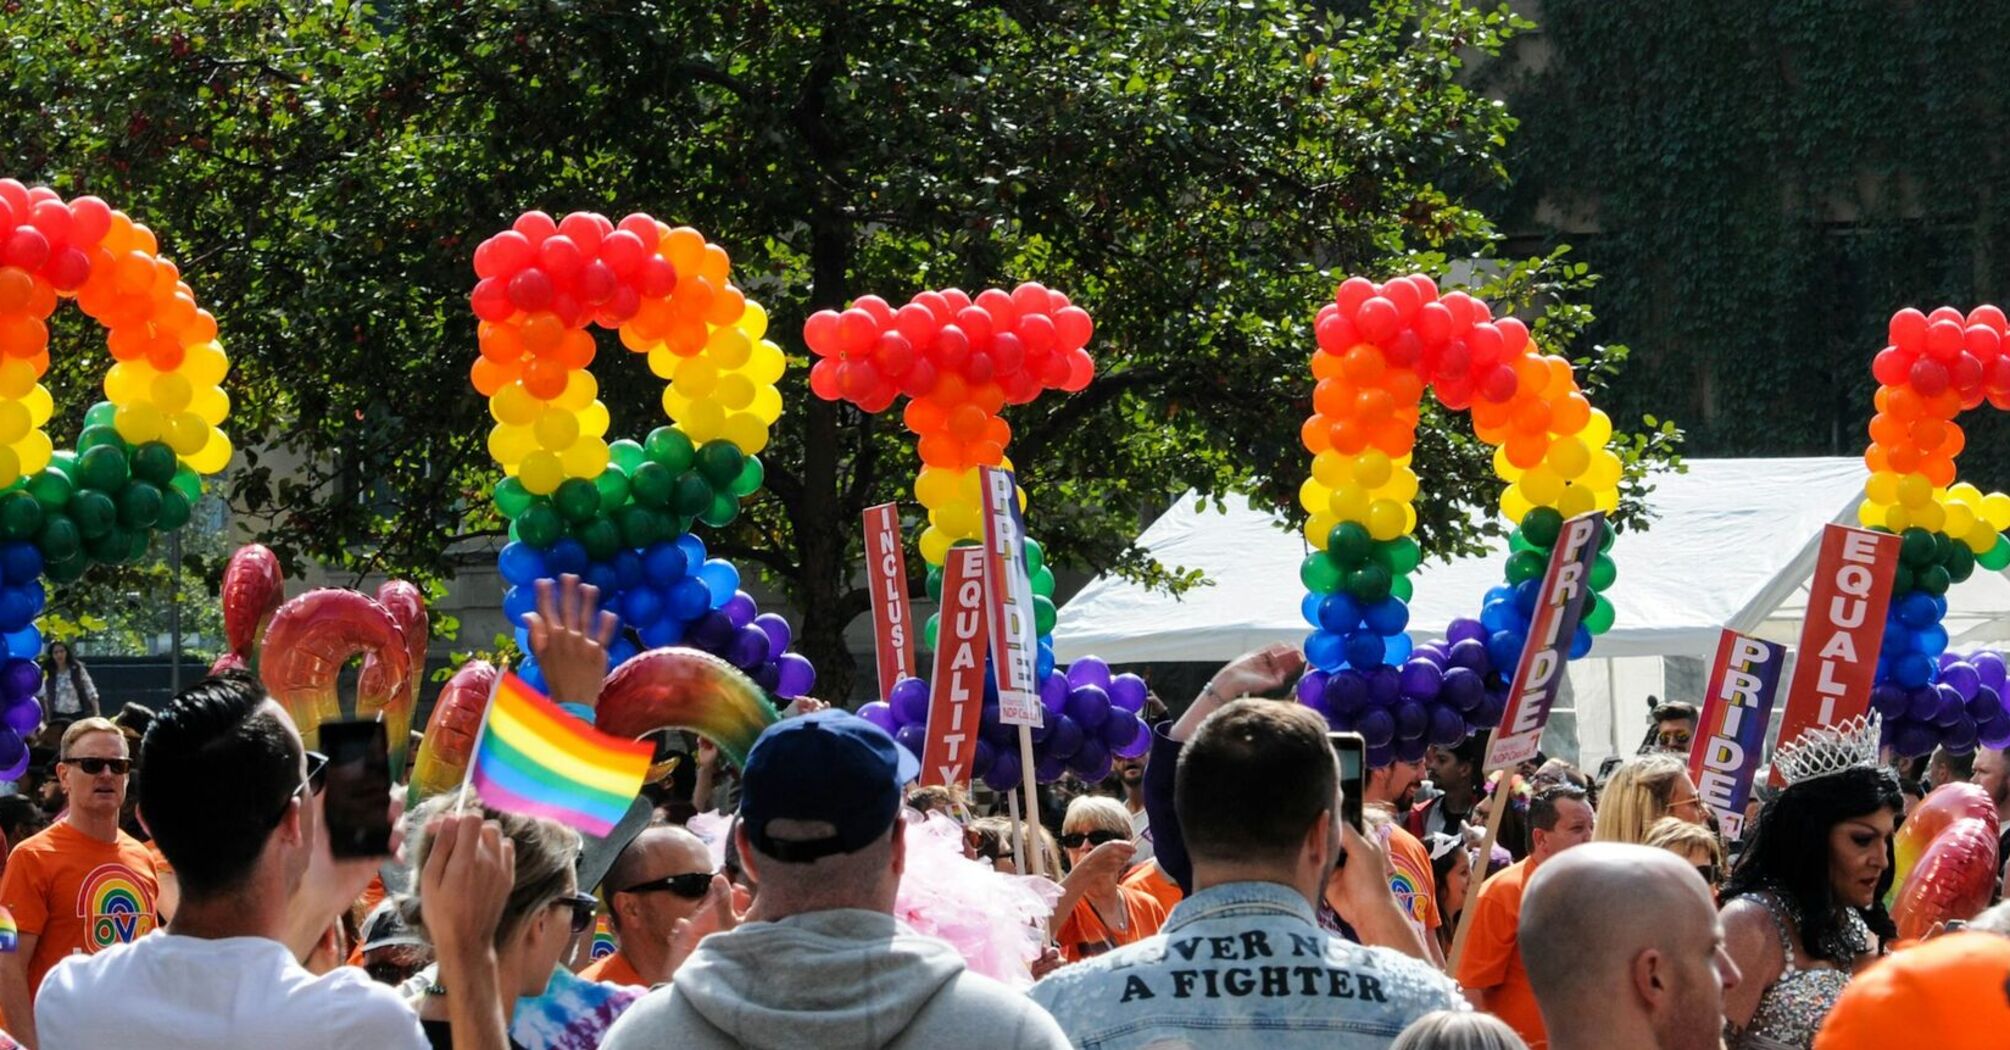 Crowd with rainbow pride balloon decorations